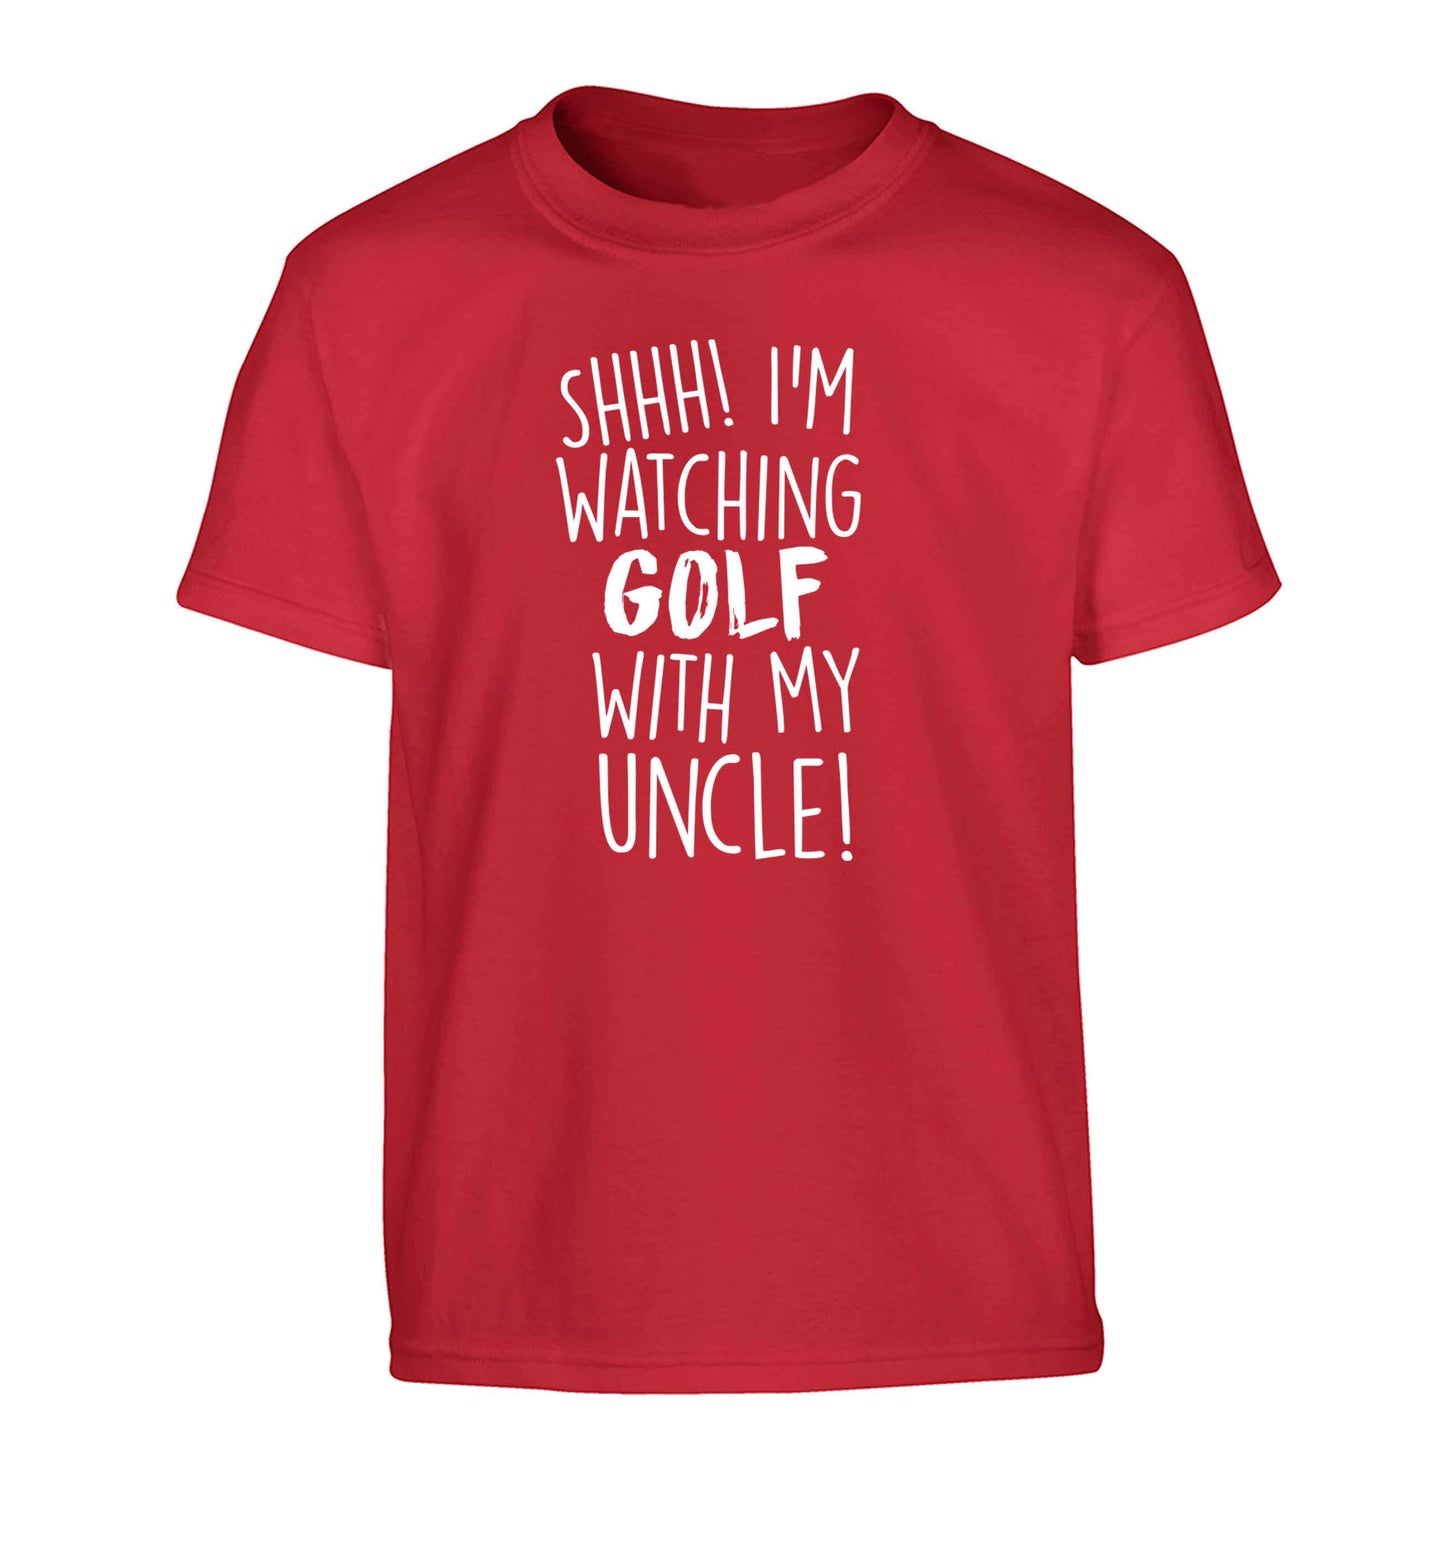 Shh I'm watching golf with my uncle Children's red Tshirt 12-13 Years